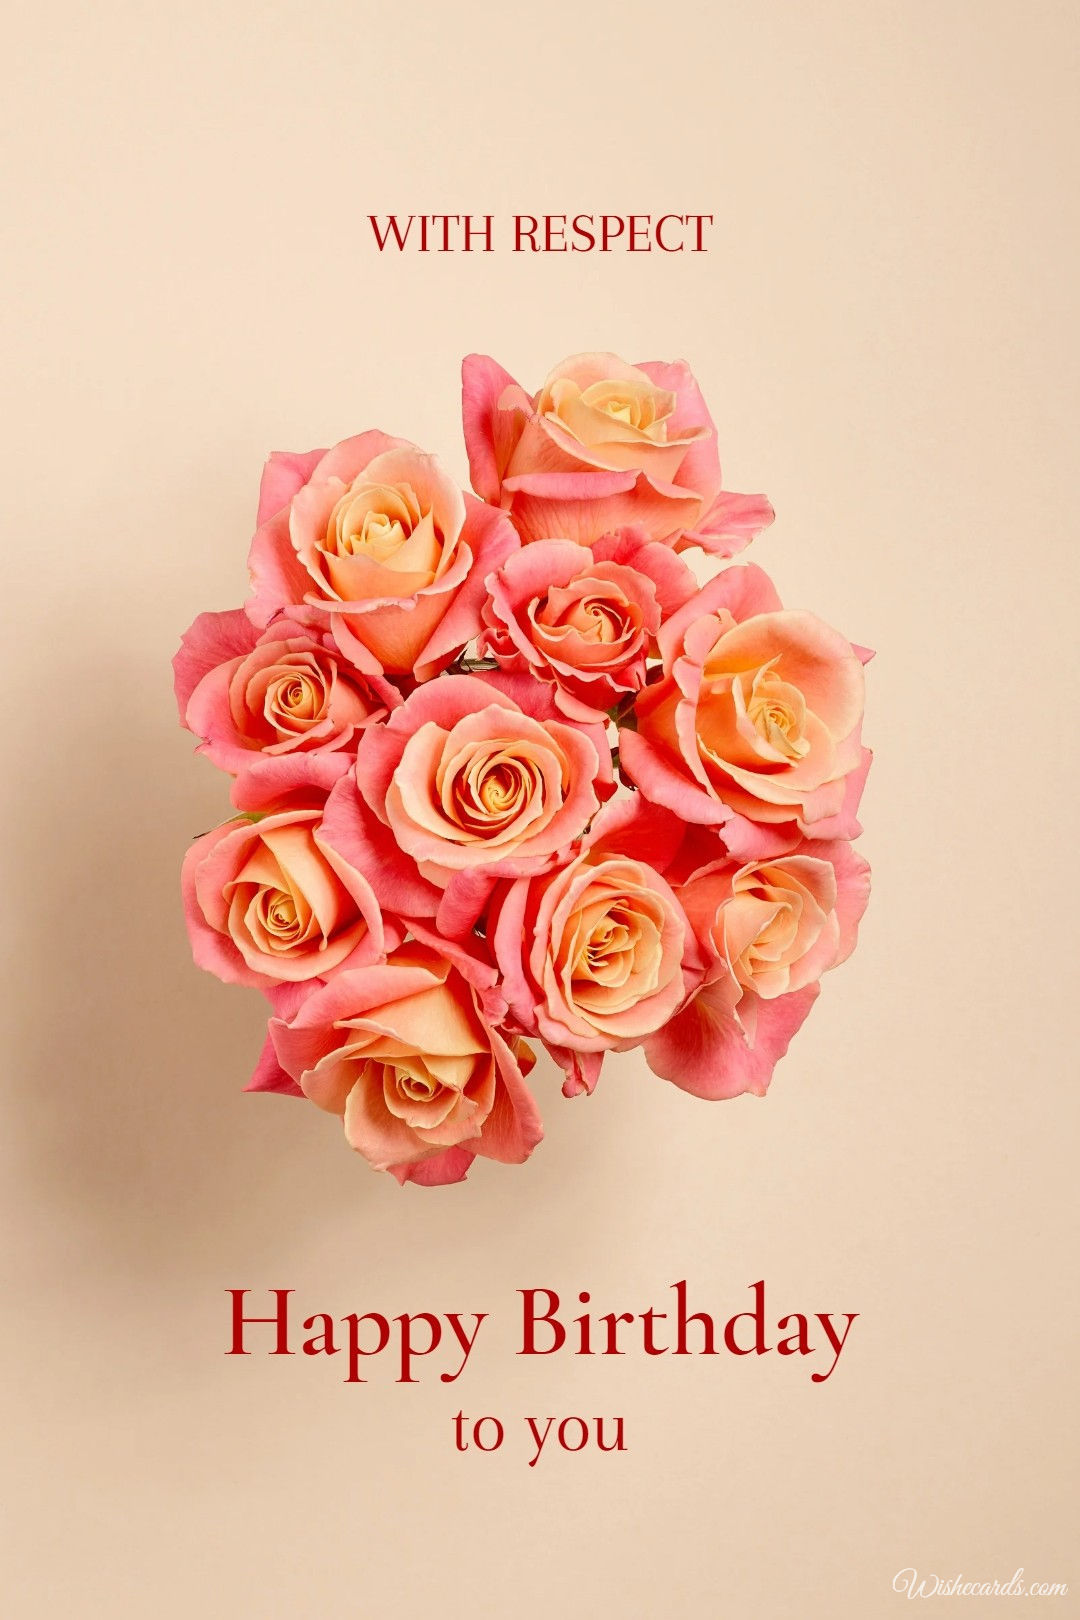 Happy Birthday Digital Card For Woman With Flowers